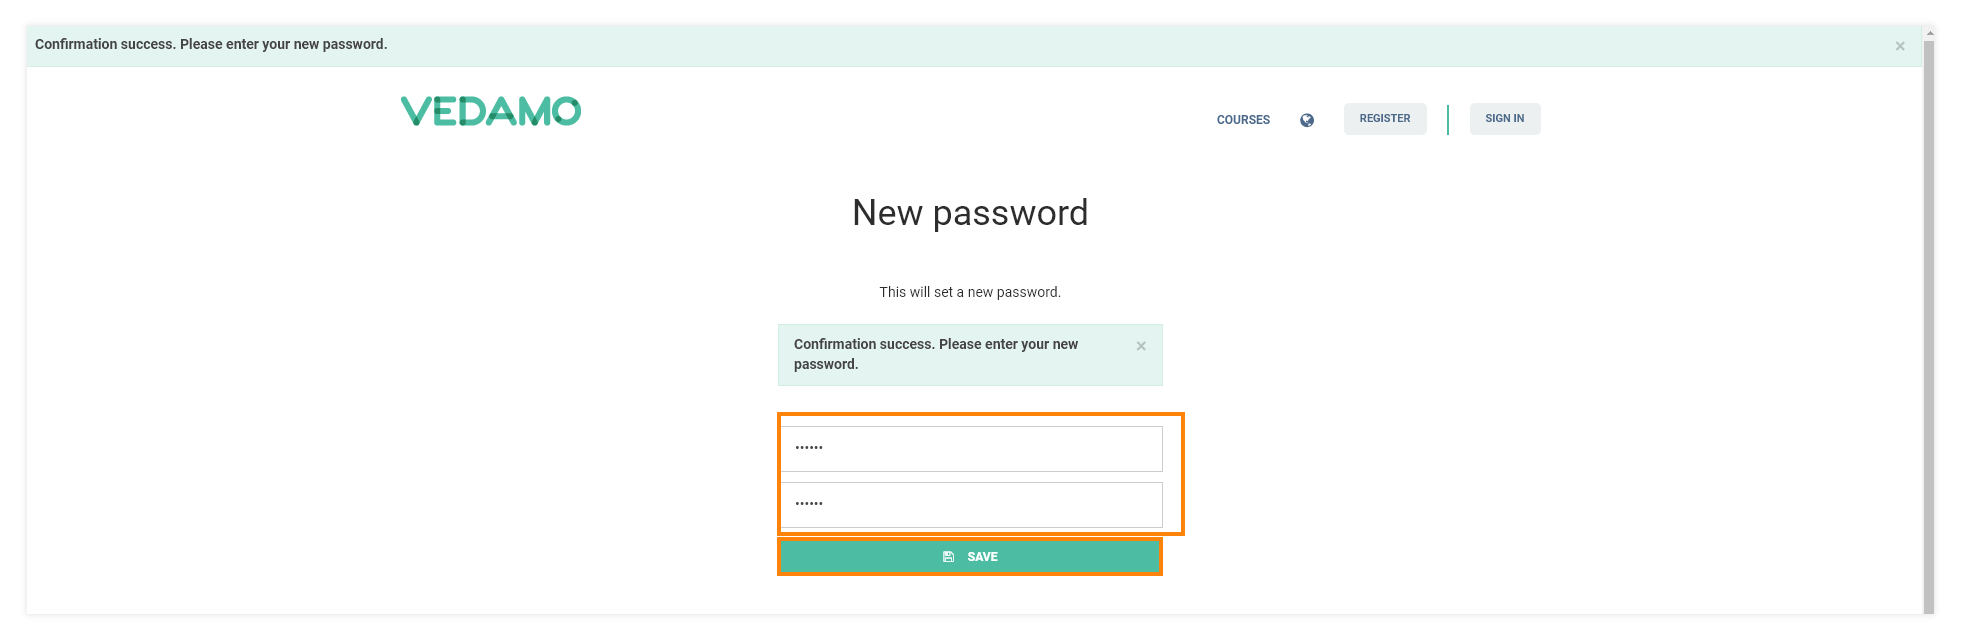 LMS Login: Fill in your username and new password to gain access to your account and go through the LMS login page